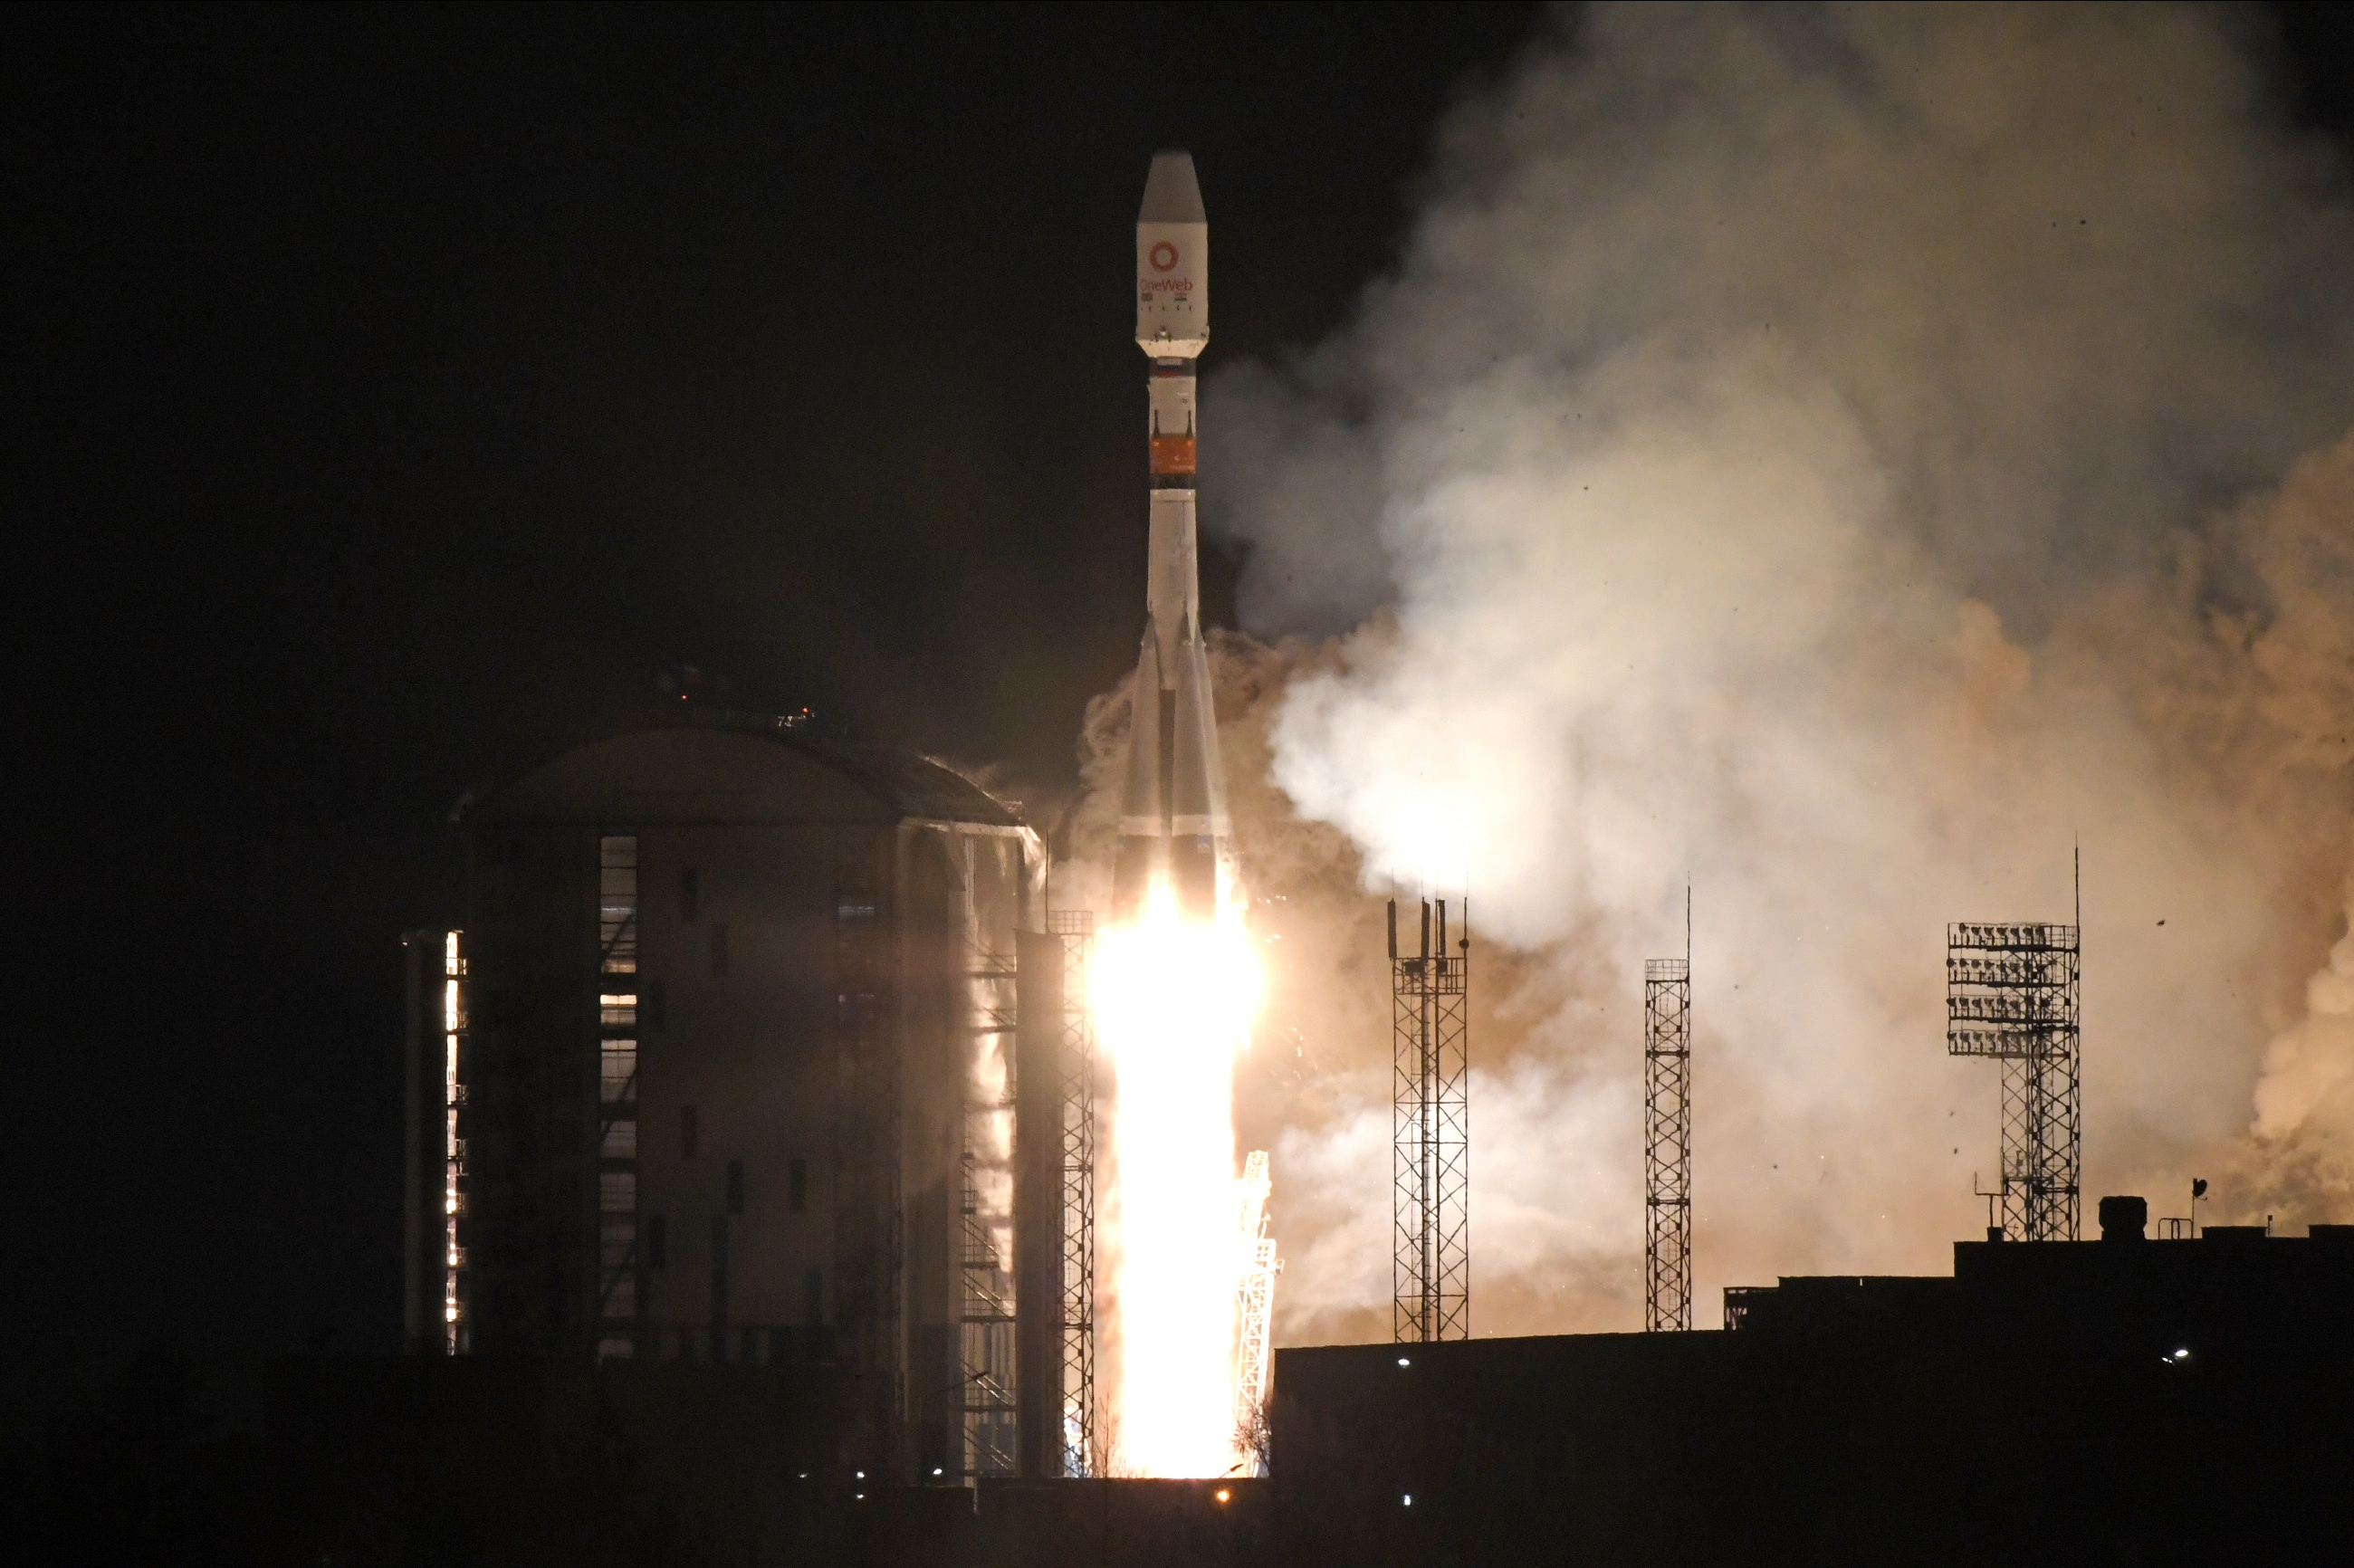 A Soyuz-2.1b rocket booster with a Fregat upper stage blasts off from a launch pad of Vostochny Cosmodrome.